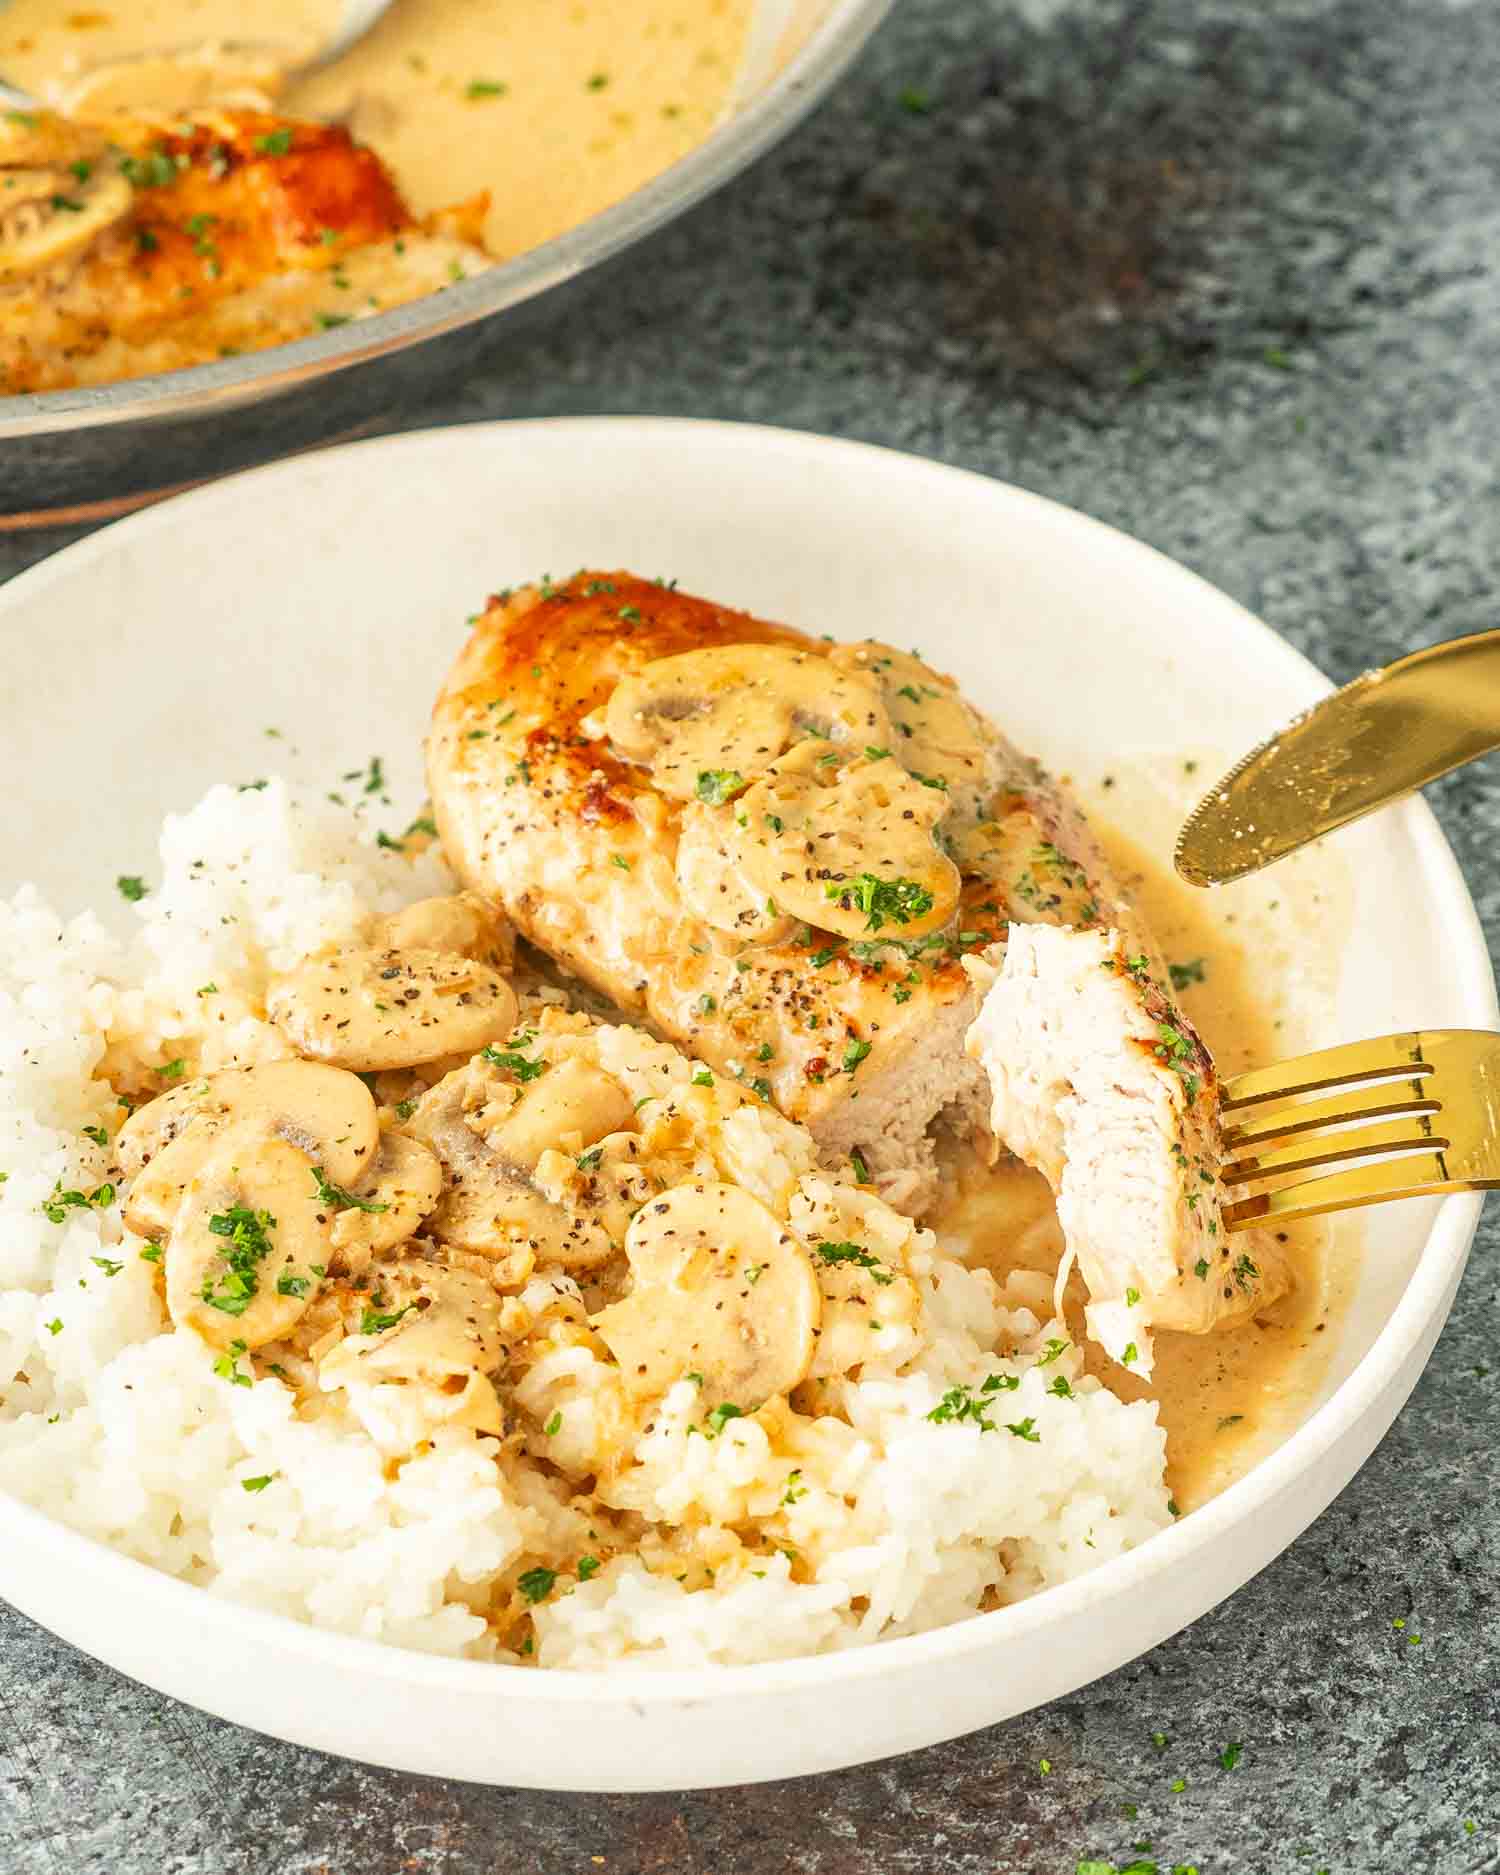 A plate of Chicken Diane served over rice, garnished with parsley, with a creamy mushroom sauce.